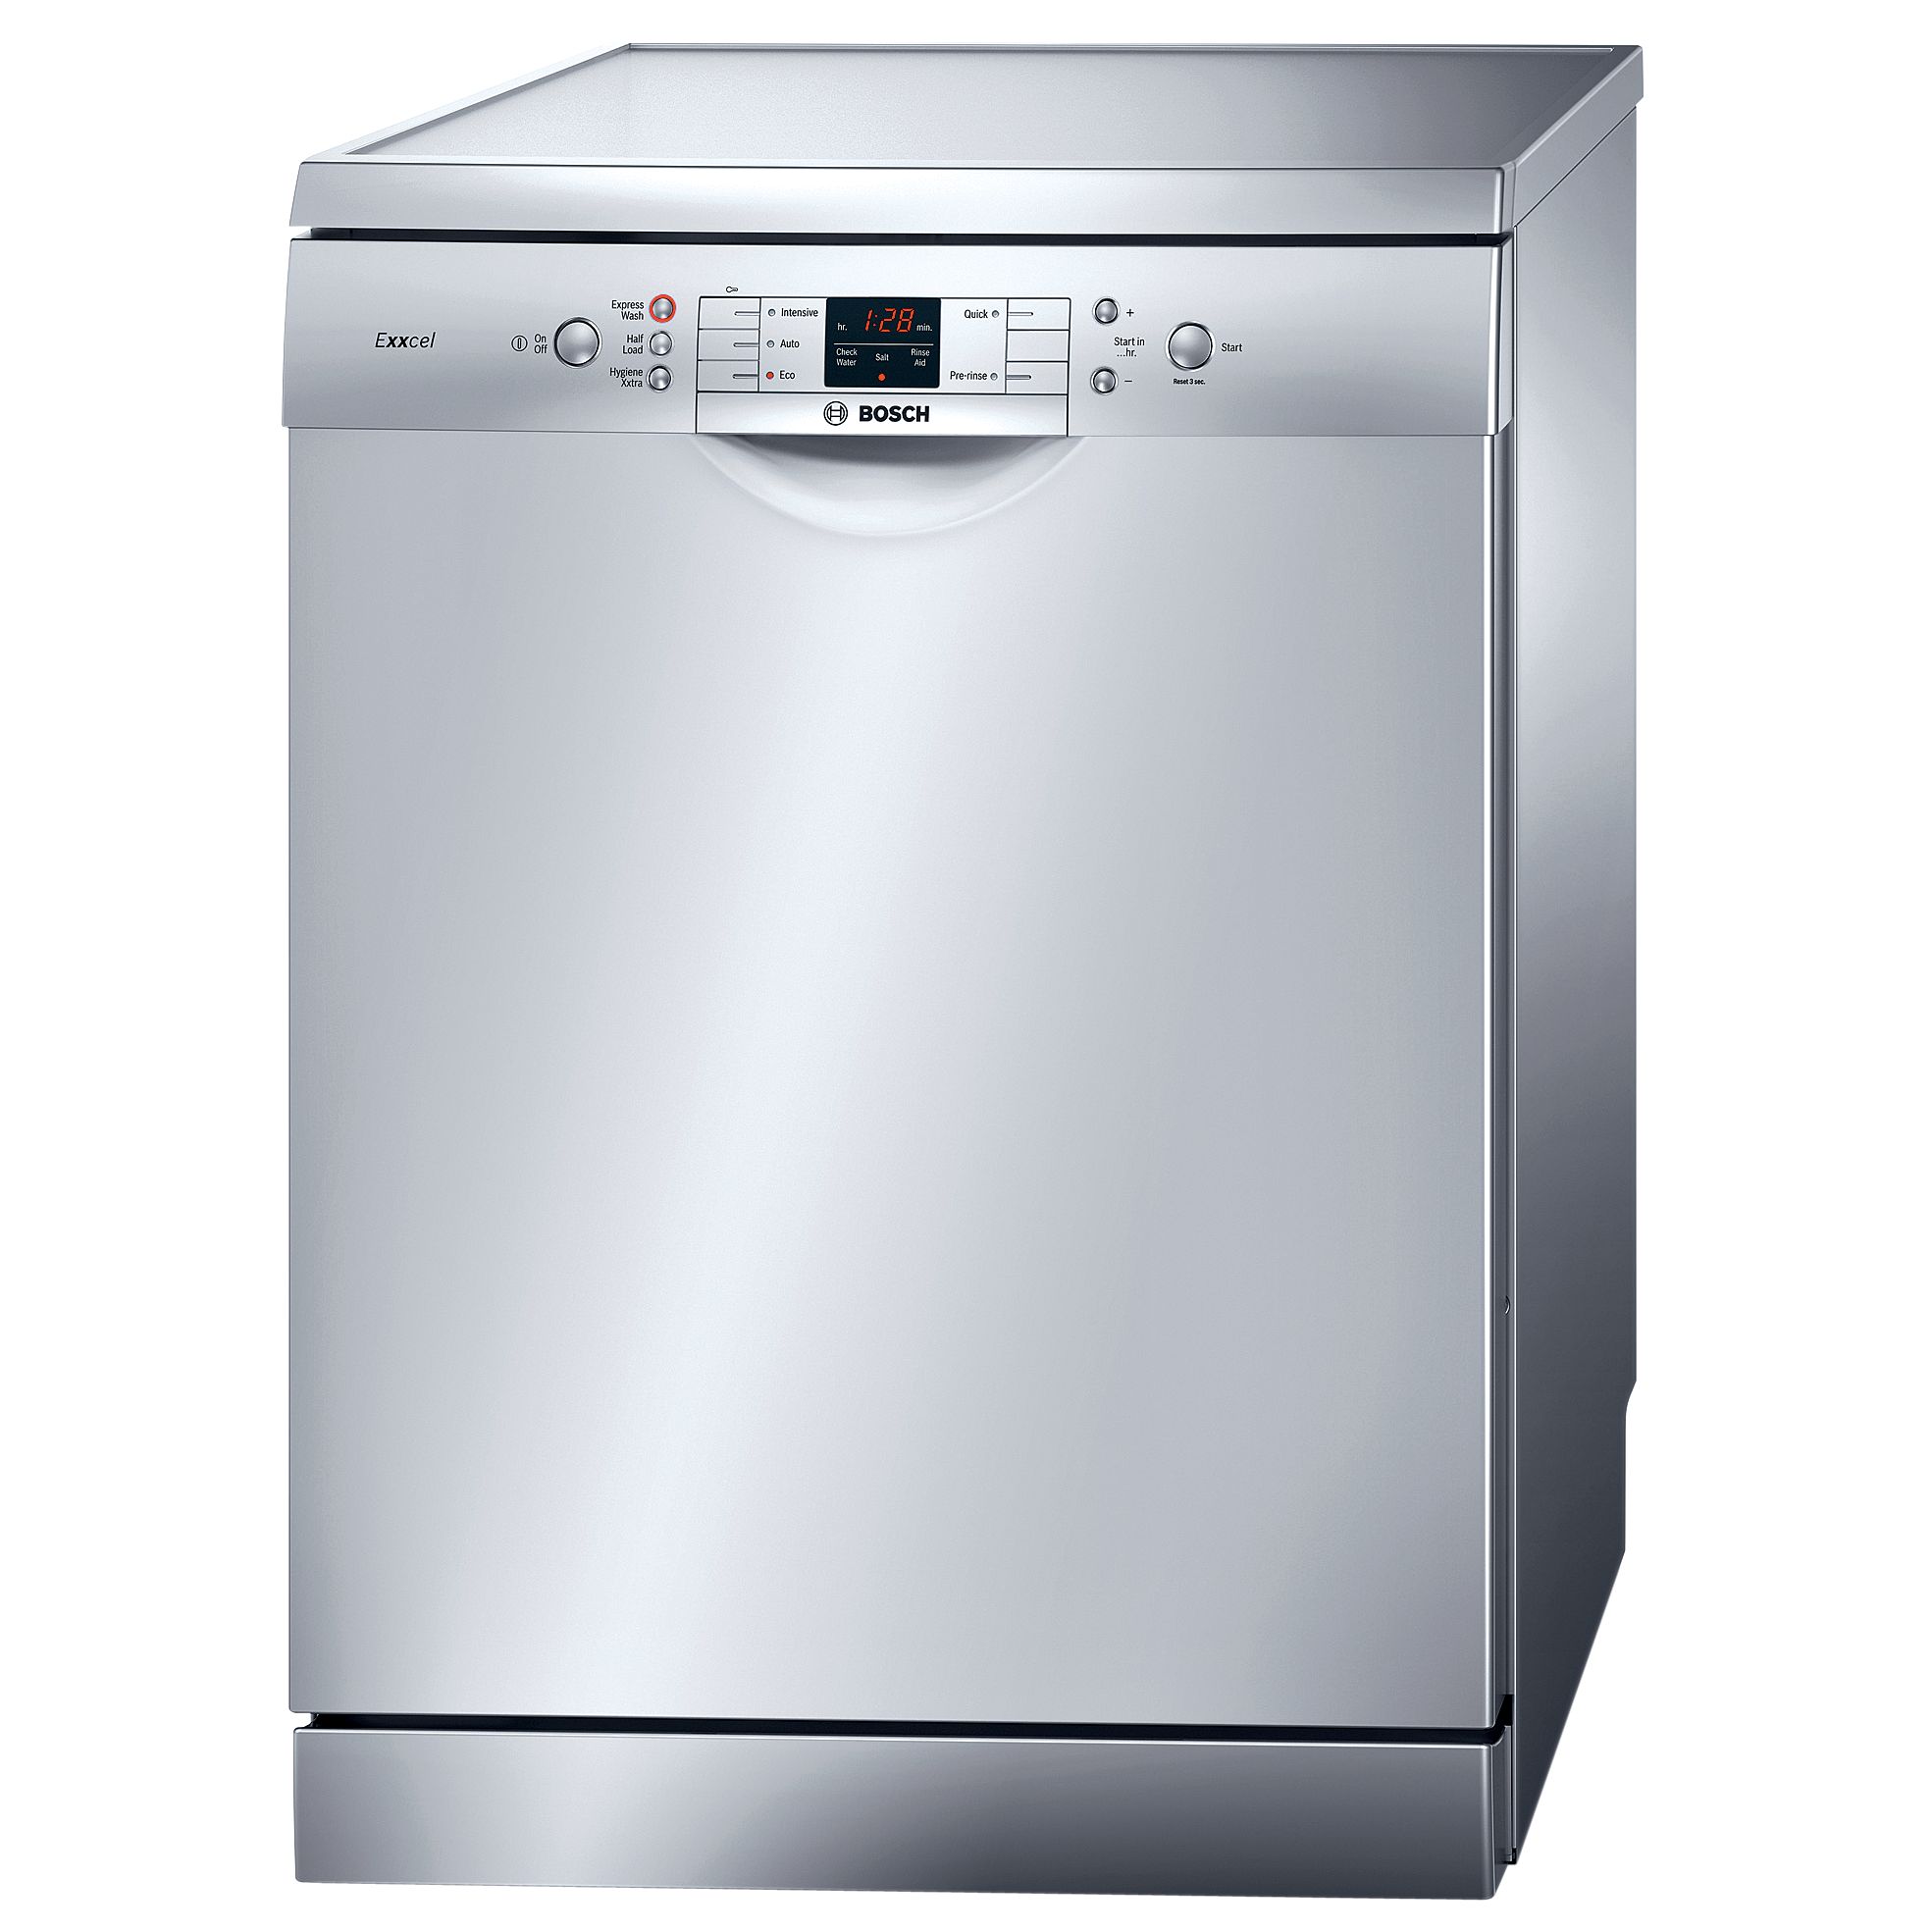 Bosch Exxcell SMS53E19GB Dishwasher, Silver at John Lewis